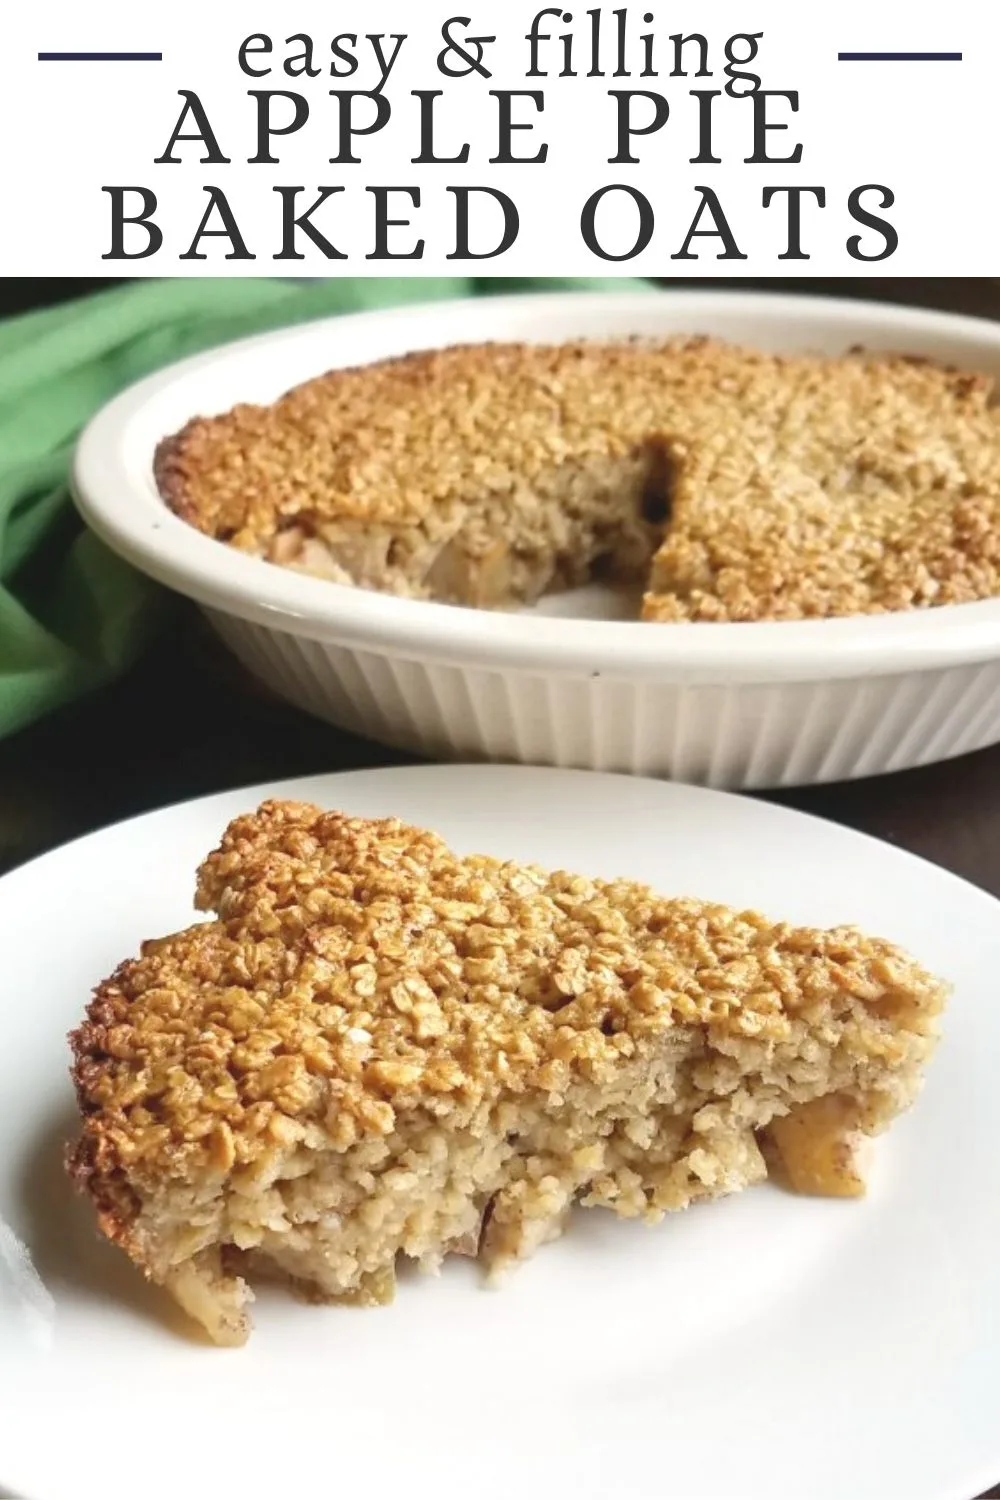 Apple pie baked oats have the flavors of apples and cinnamon in a nutritious breakfast option.  It is easy to make and the leftovers are great too!